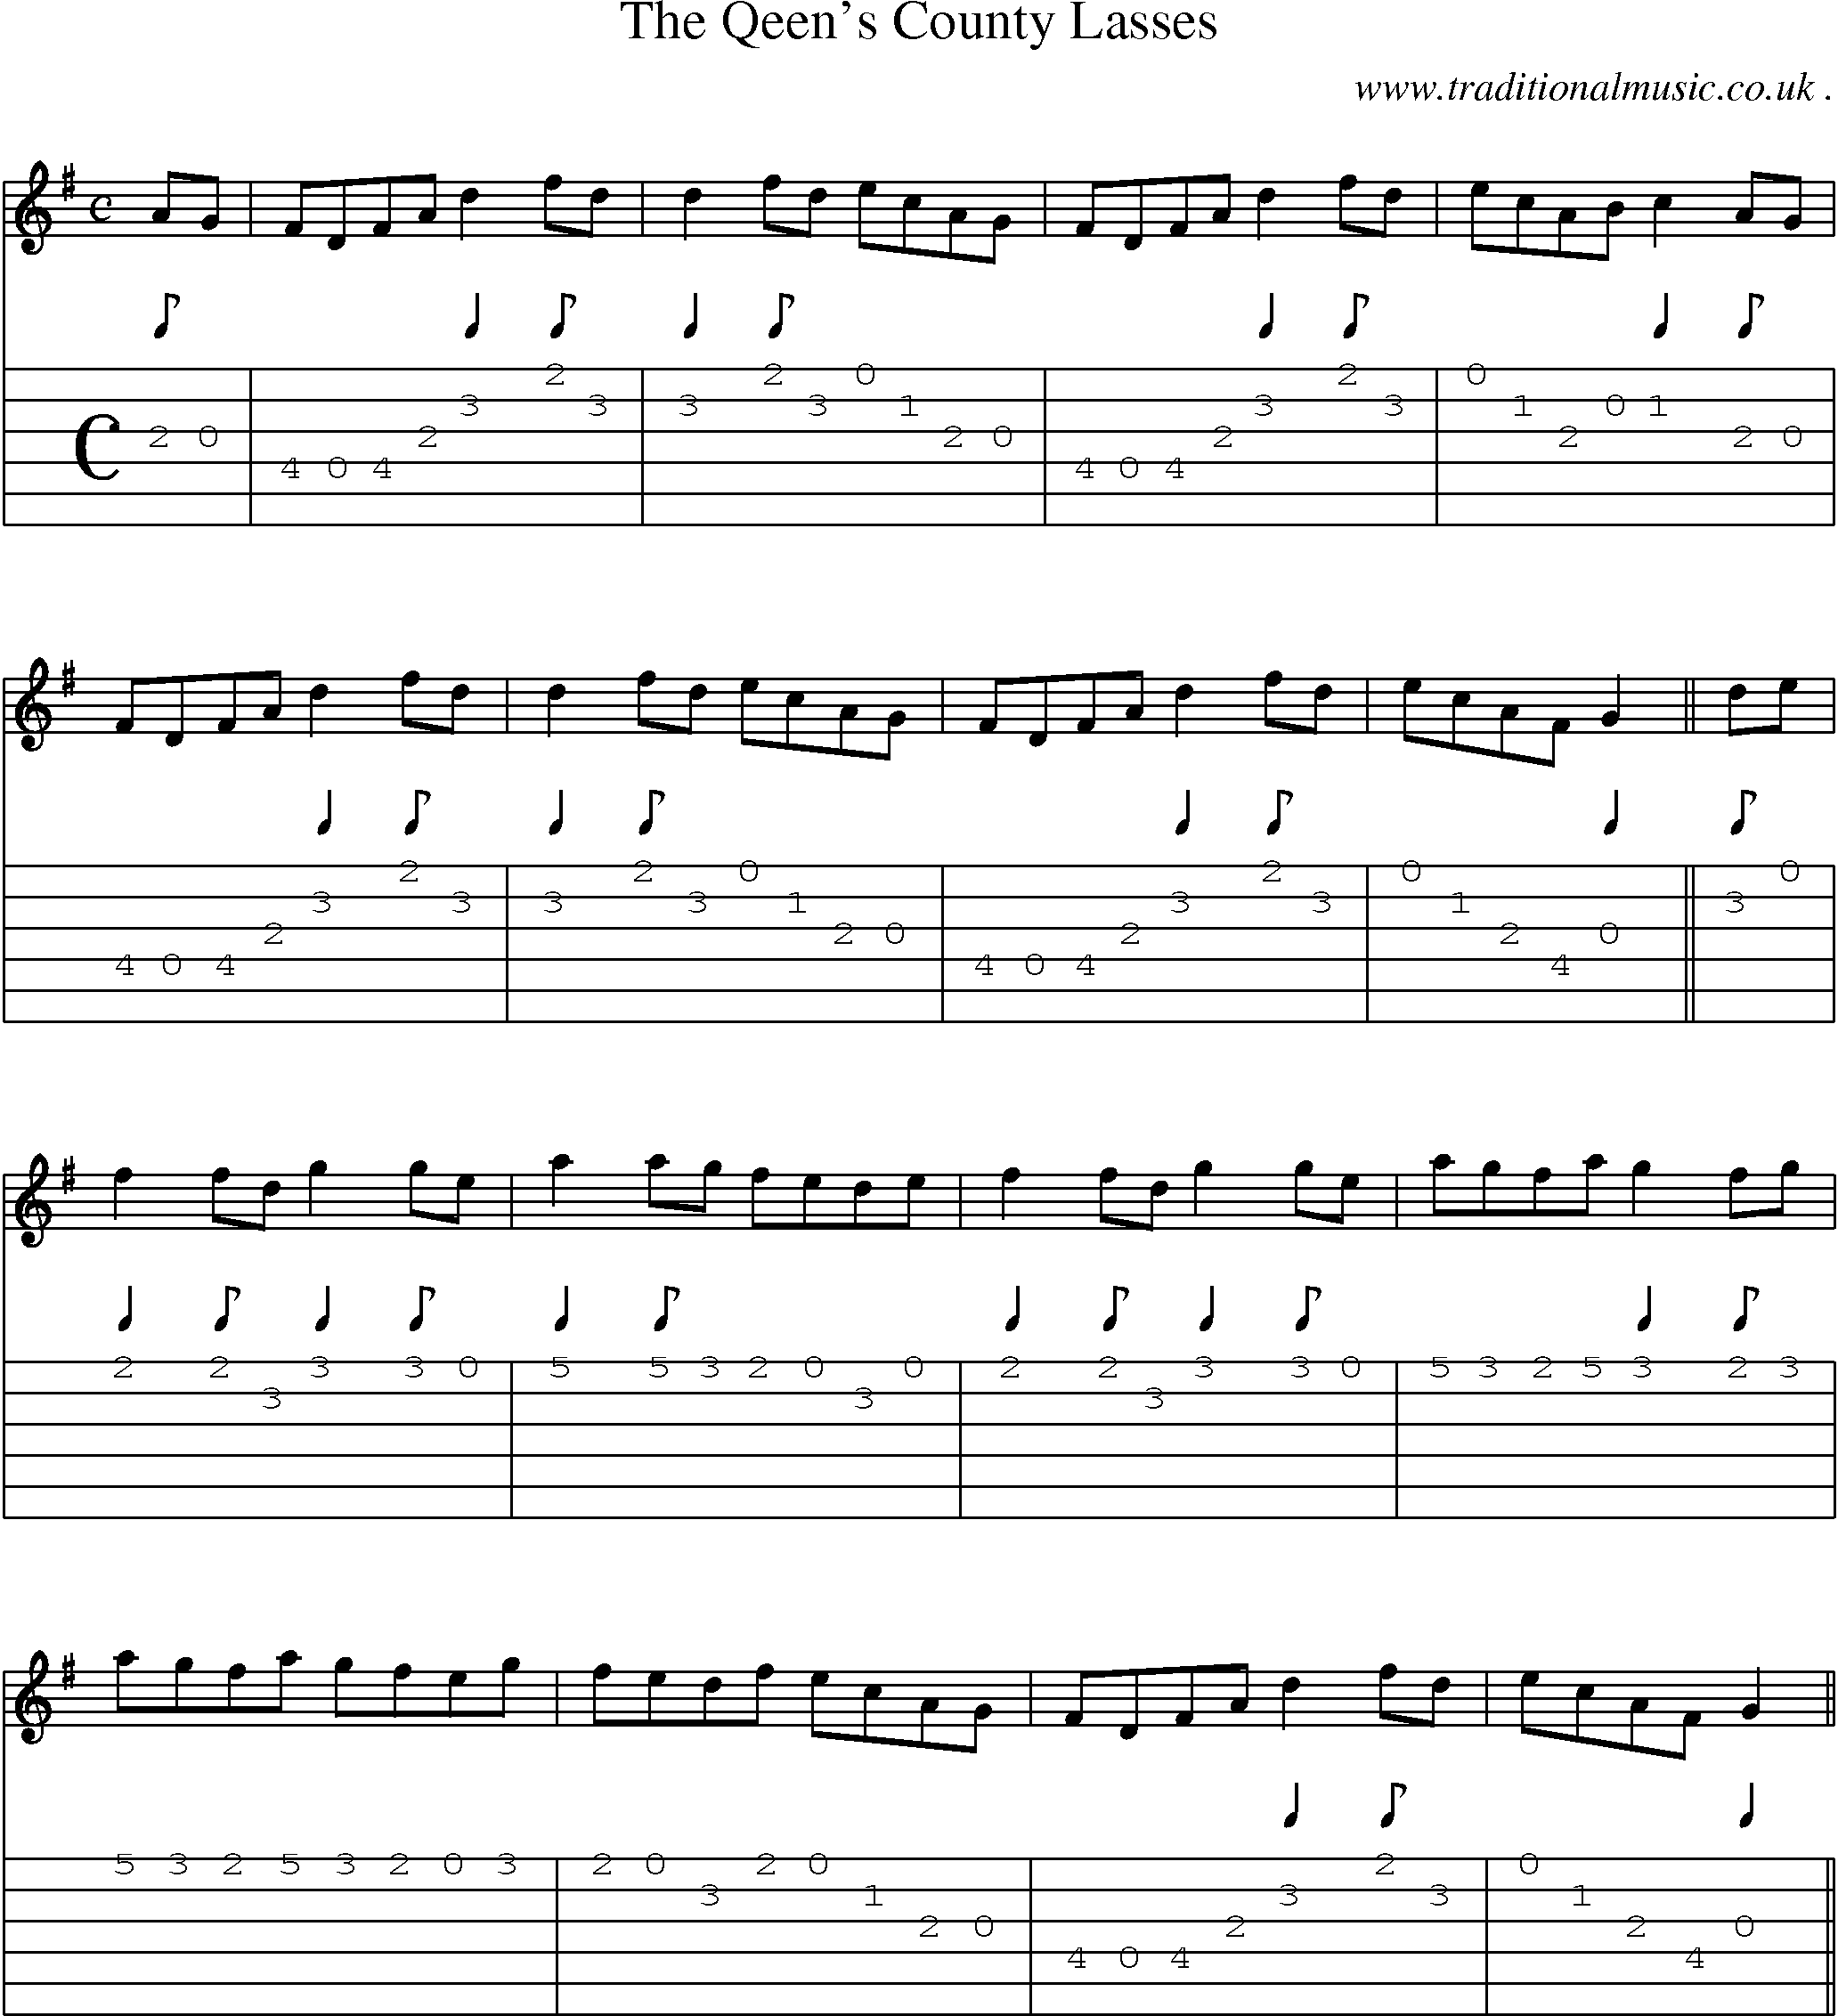 Sheet-Music and Guitar Tabs for The Qeens County Lasses